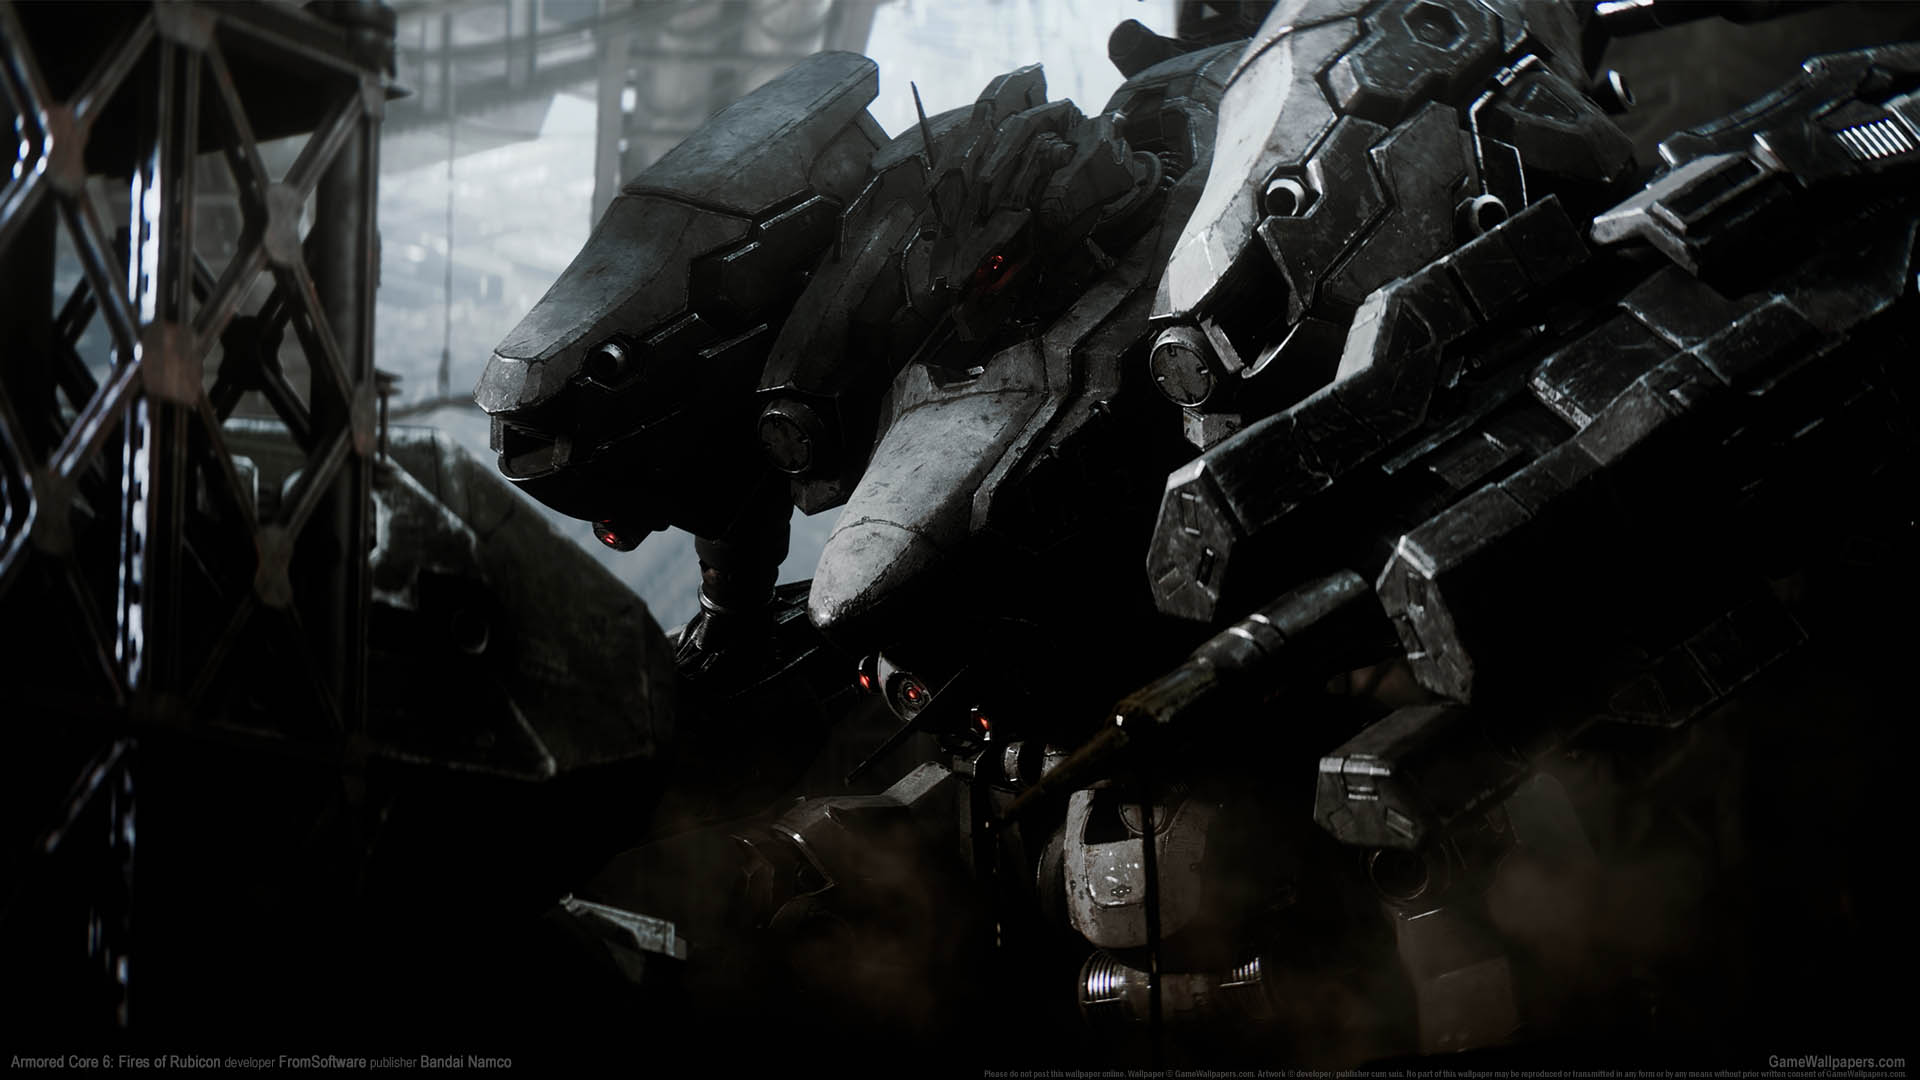 Armored Core 6: Fires of Rubicon wallpaper 03 1920x1080